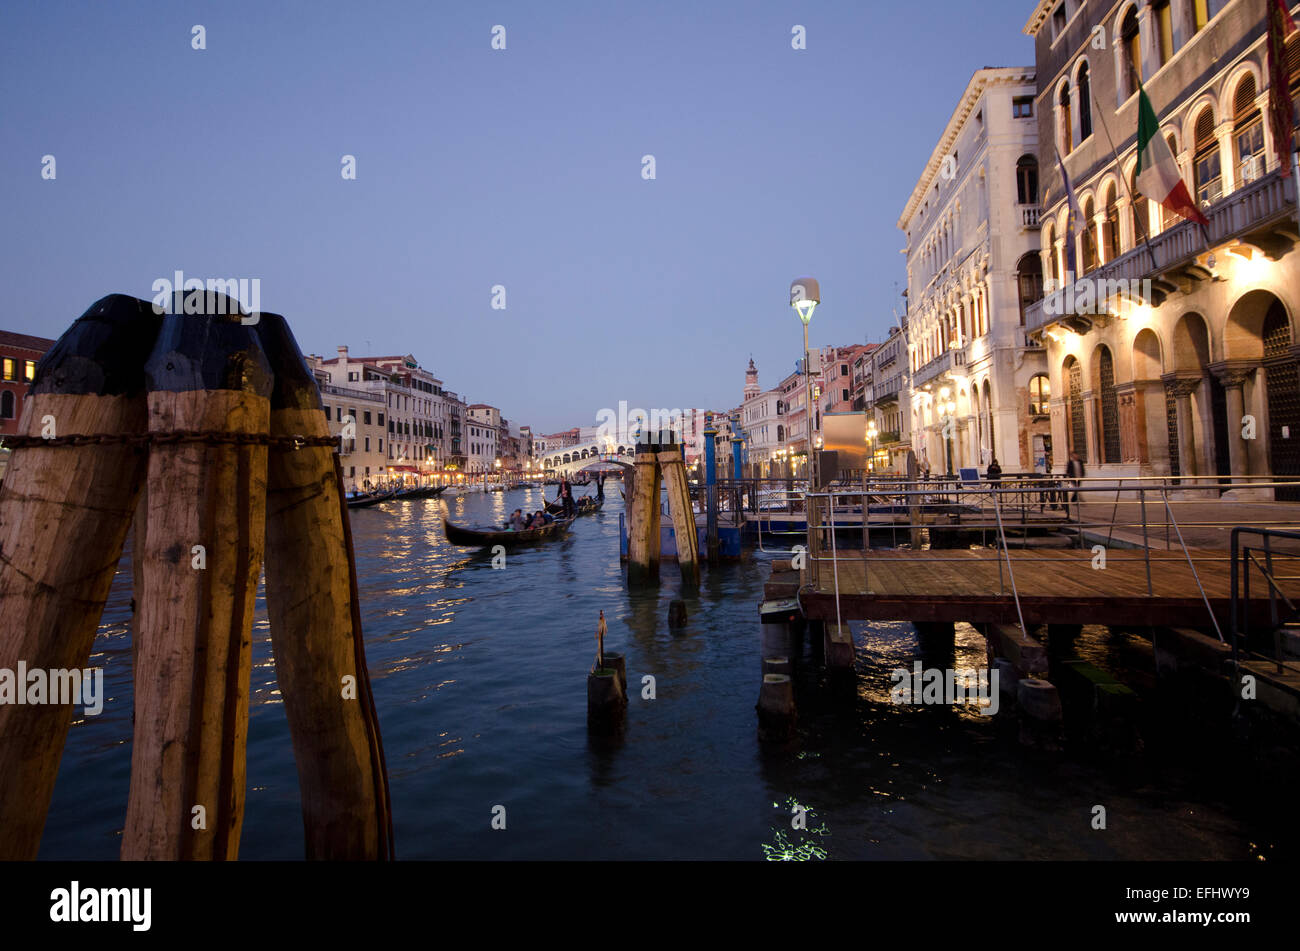 View at dusk  from a water taxi jetty showing the Grand Canal with the Rialto bridge in the background in Venice, Italy Stock Photo